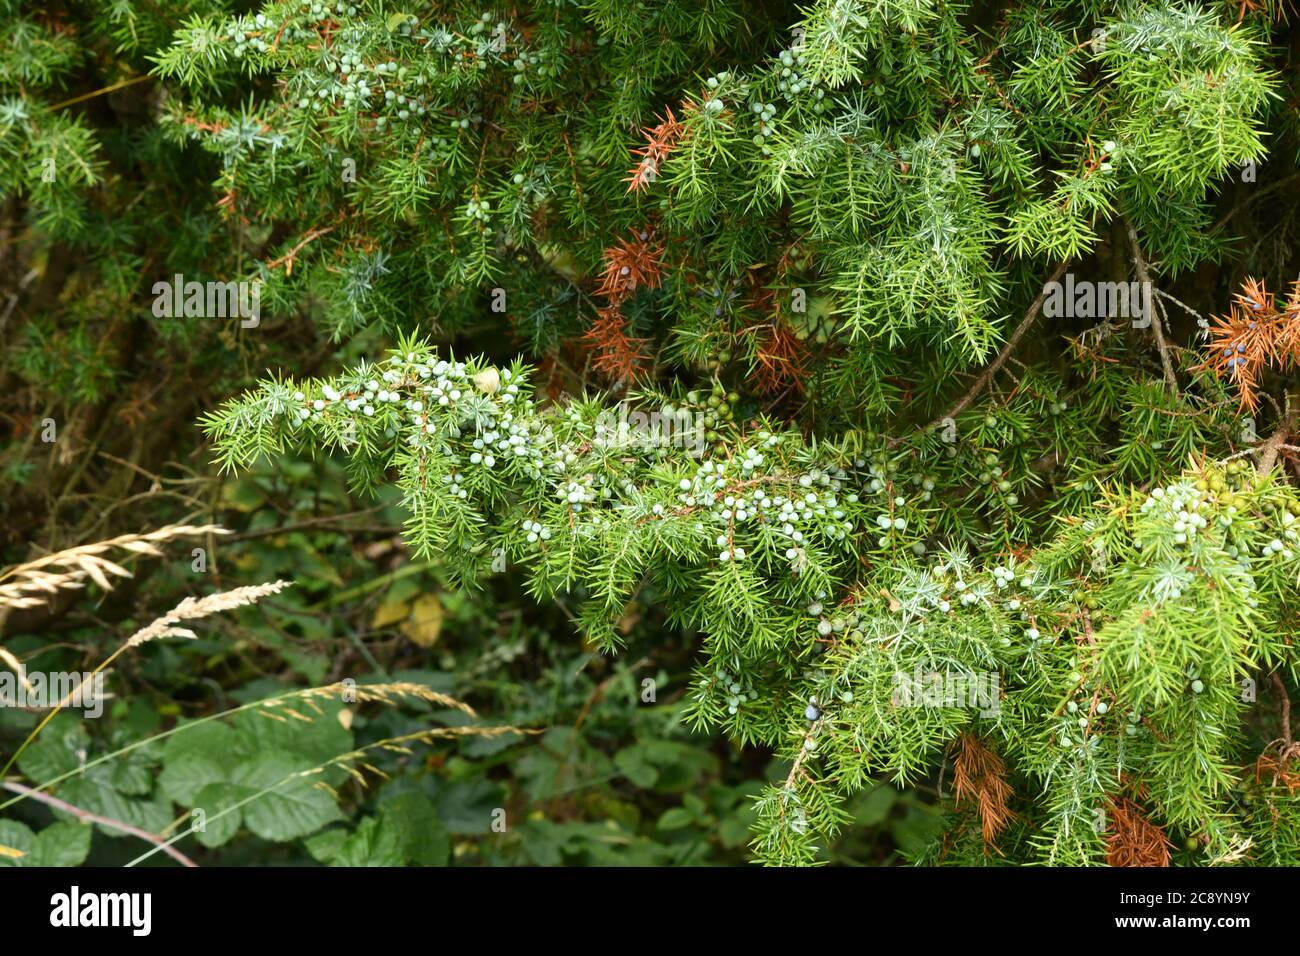 Heavily laden branches of a Juniper tree'(Juniperus communis) covered with green berries.One of three native evergreen conifers  it thrives on chalk l Stock Photo